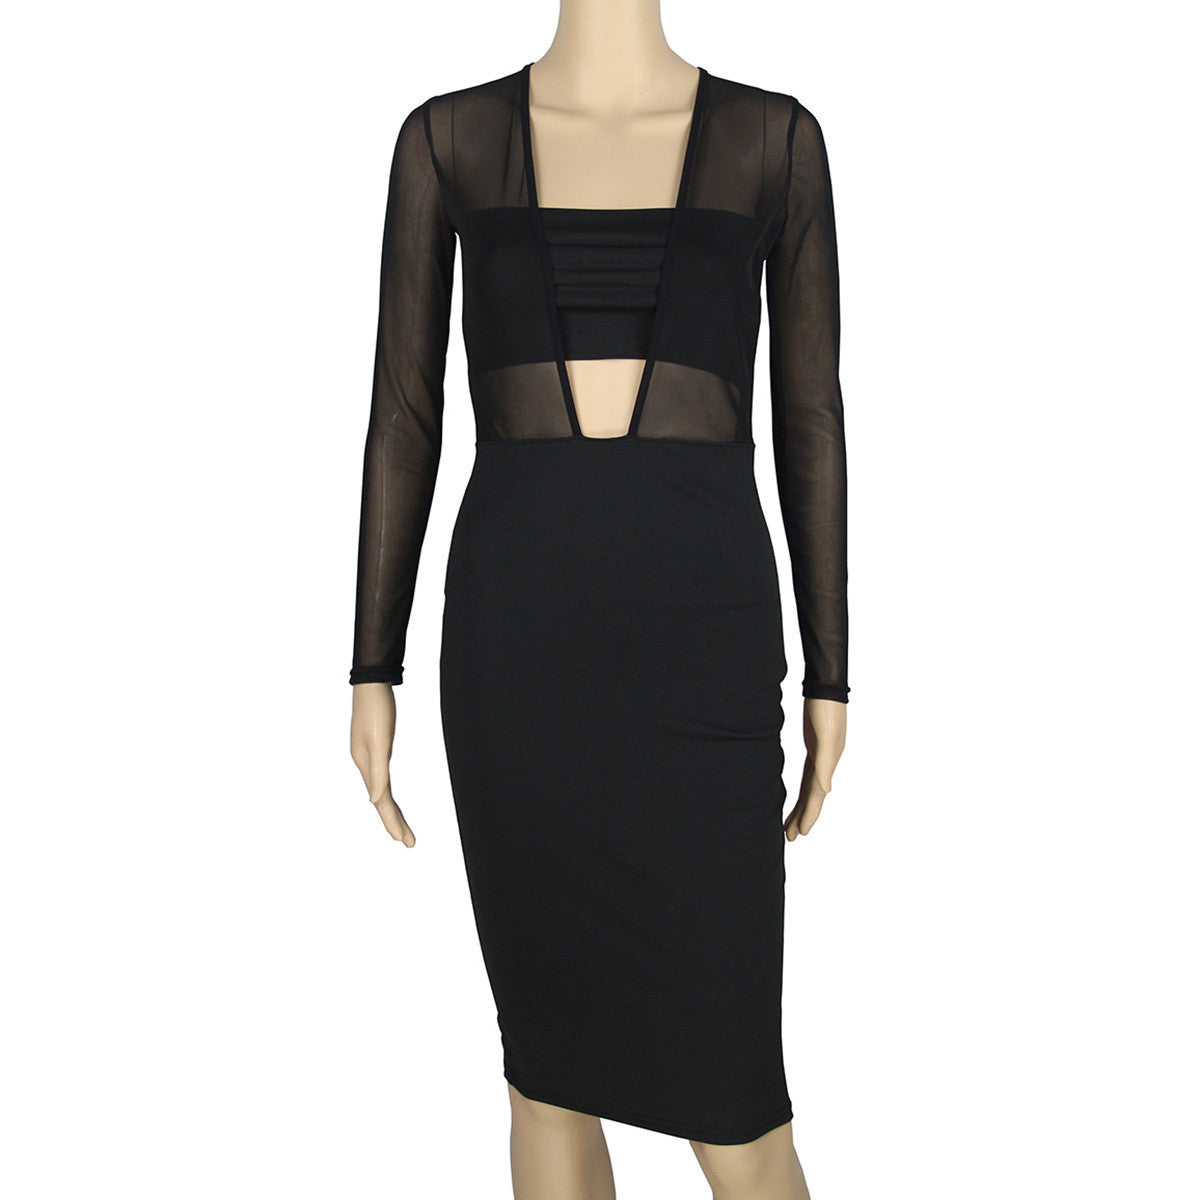 Black Mesh Patchwork Hollow Out Bodycon Knee-length Dress